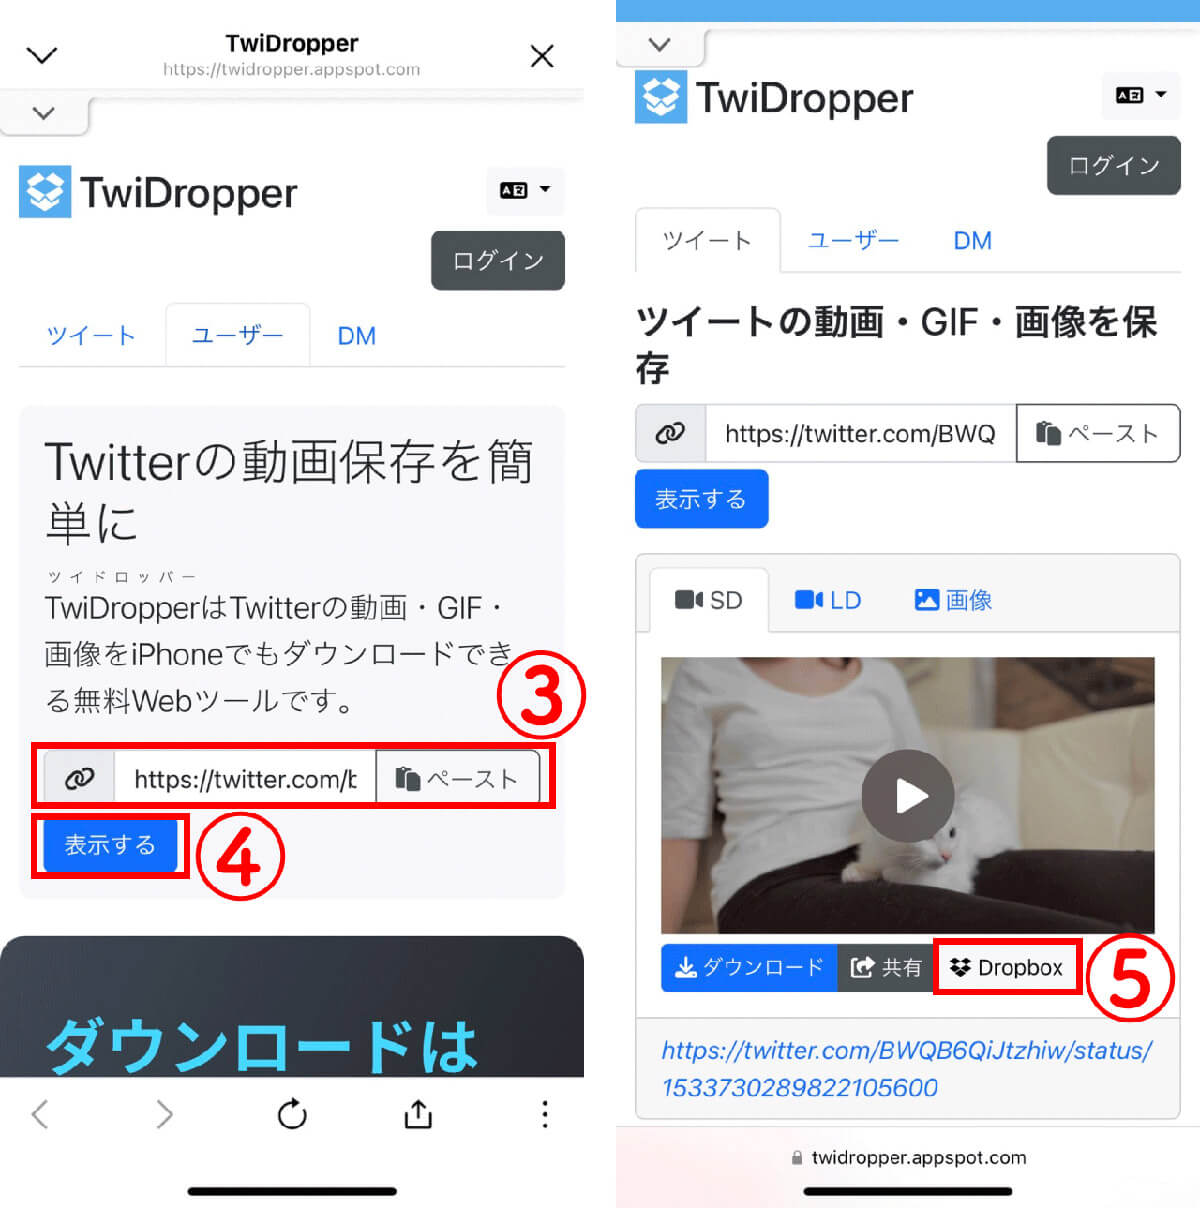 TwiDropper（iPhone/Android）2